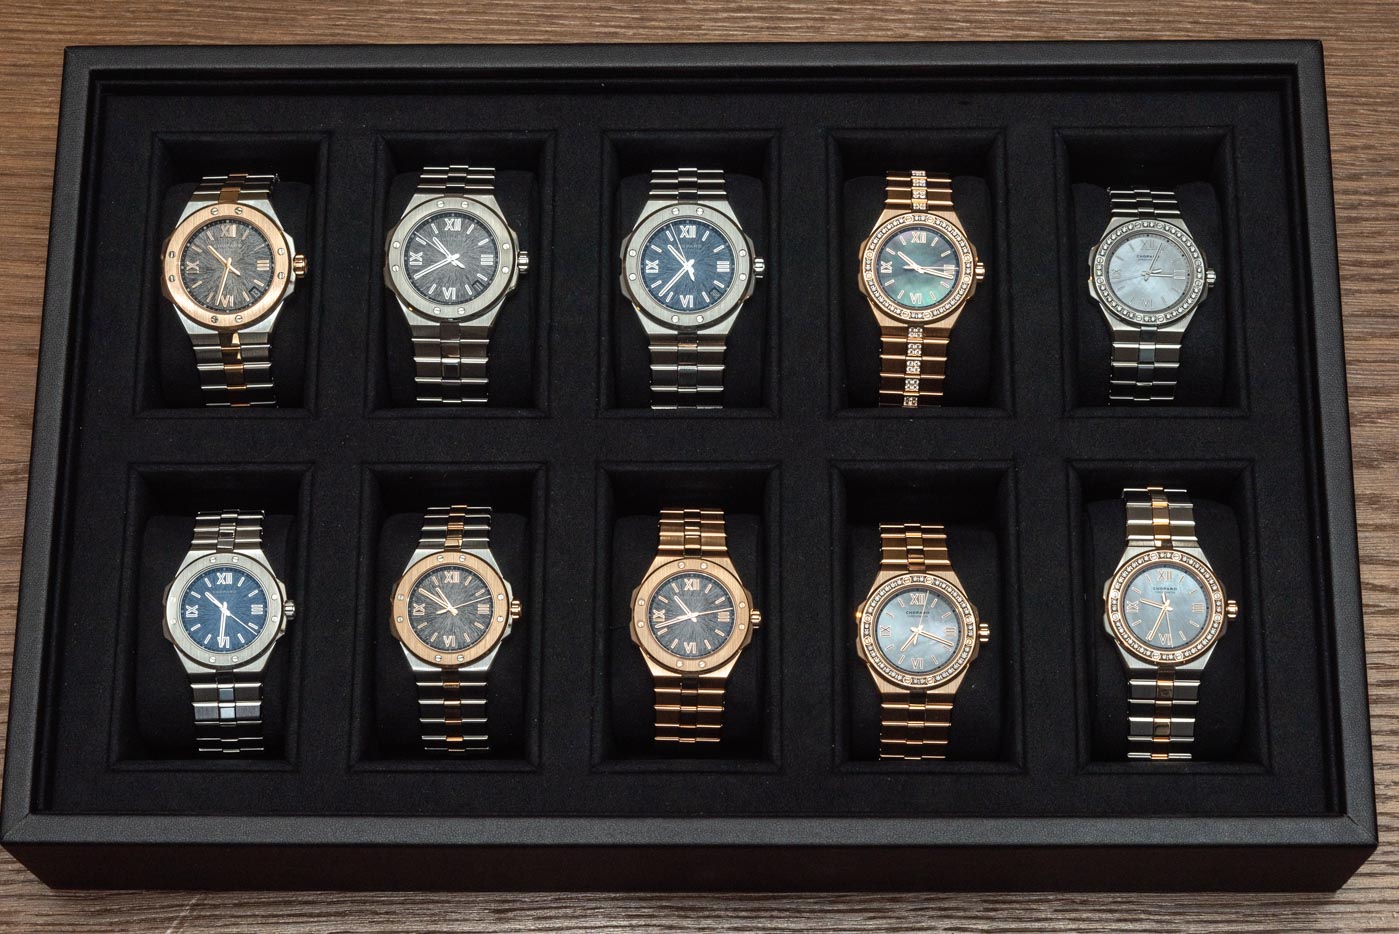 Chopard Alpine Eagle Watch Collection World Debut | Page 3 of 3 